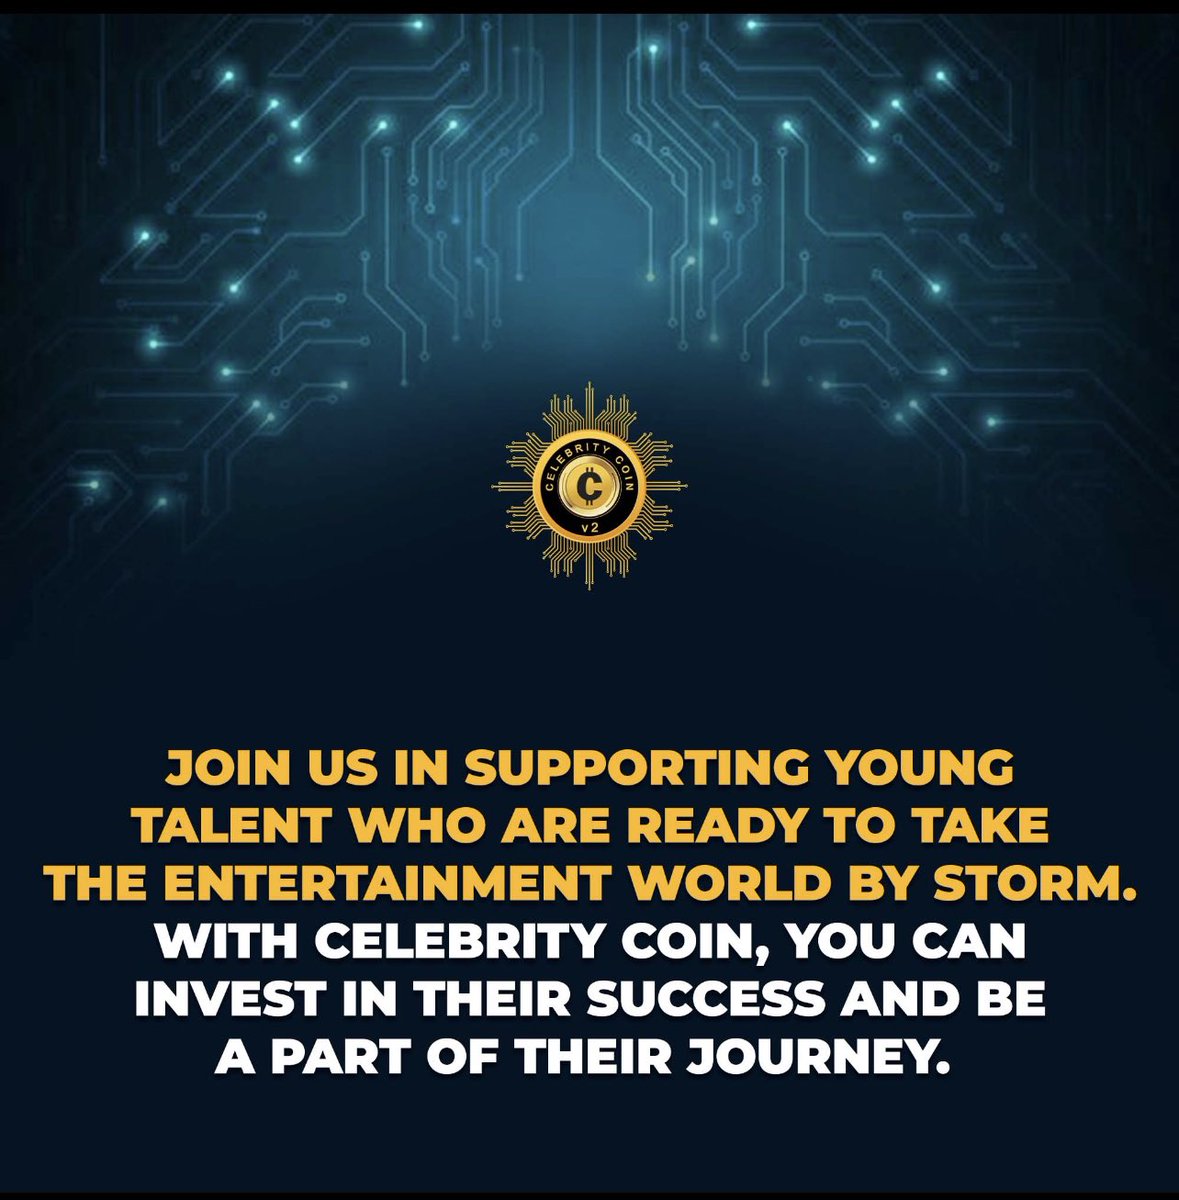 𝗝𝗼𝗶𝗻 𝘂𝘀 in supporting young
talent who are ready to take
the #entertainment world by #storm.
With 𝐂𝐞𝐥𝐞𝐛𝐫𝐢𝐭𝐲 𝐂𝐨𝐢𝐧, you can
invest in their success and be
a part of their 𝗷𝗼𝘂𝗿𝗻𝗲𝘆.

#STUDIONATION2 #celebritycoin #investing #adamsaini cryptocurrency #